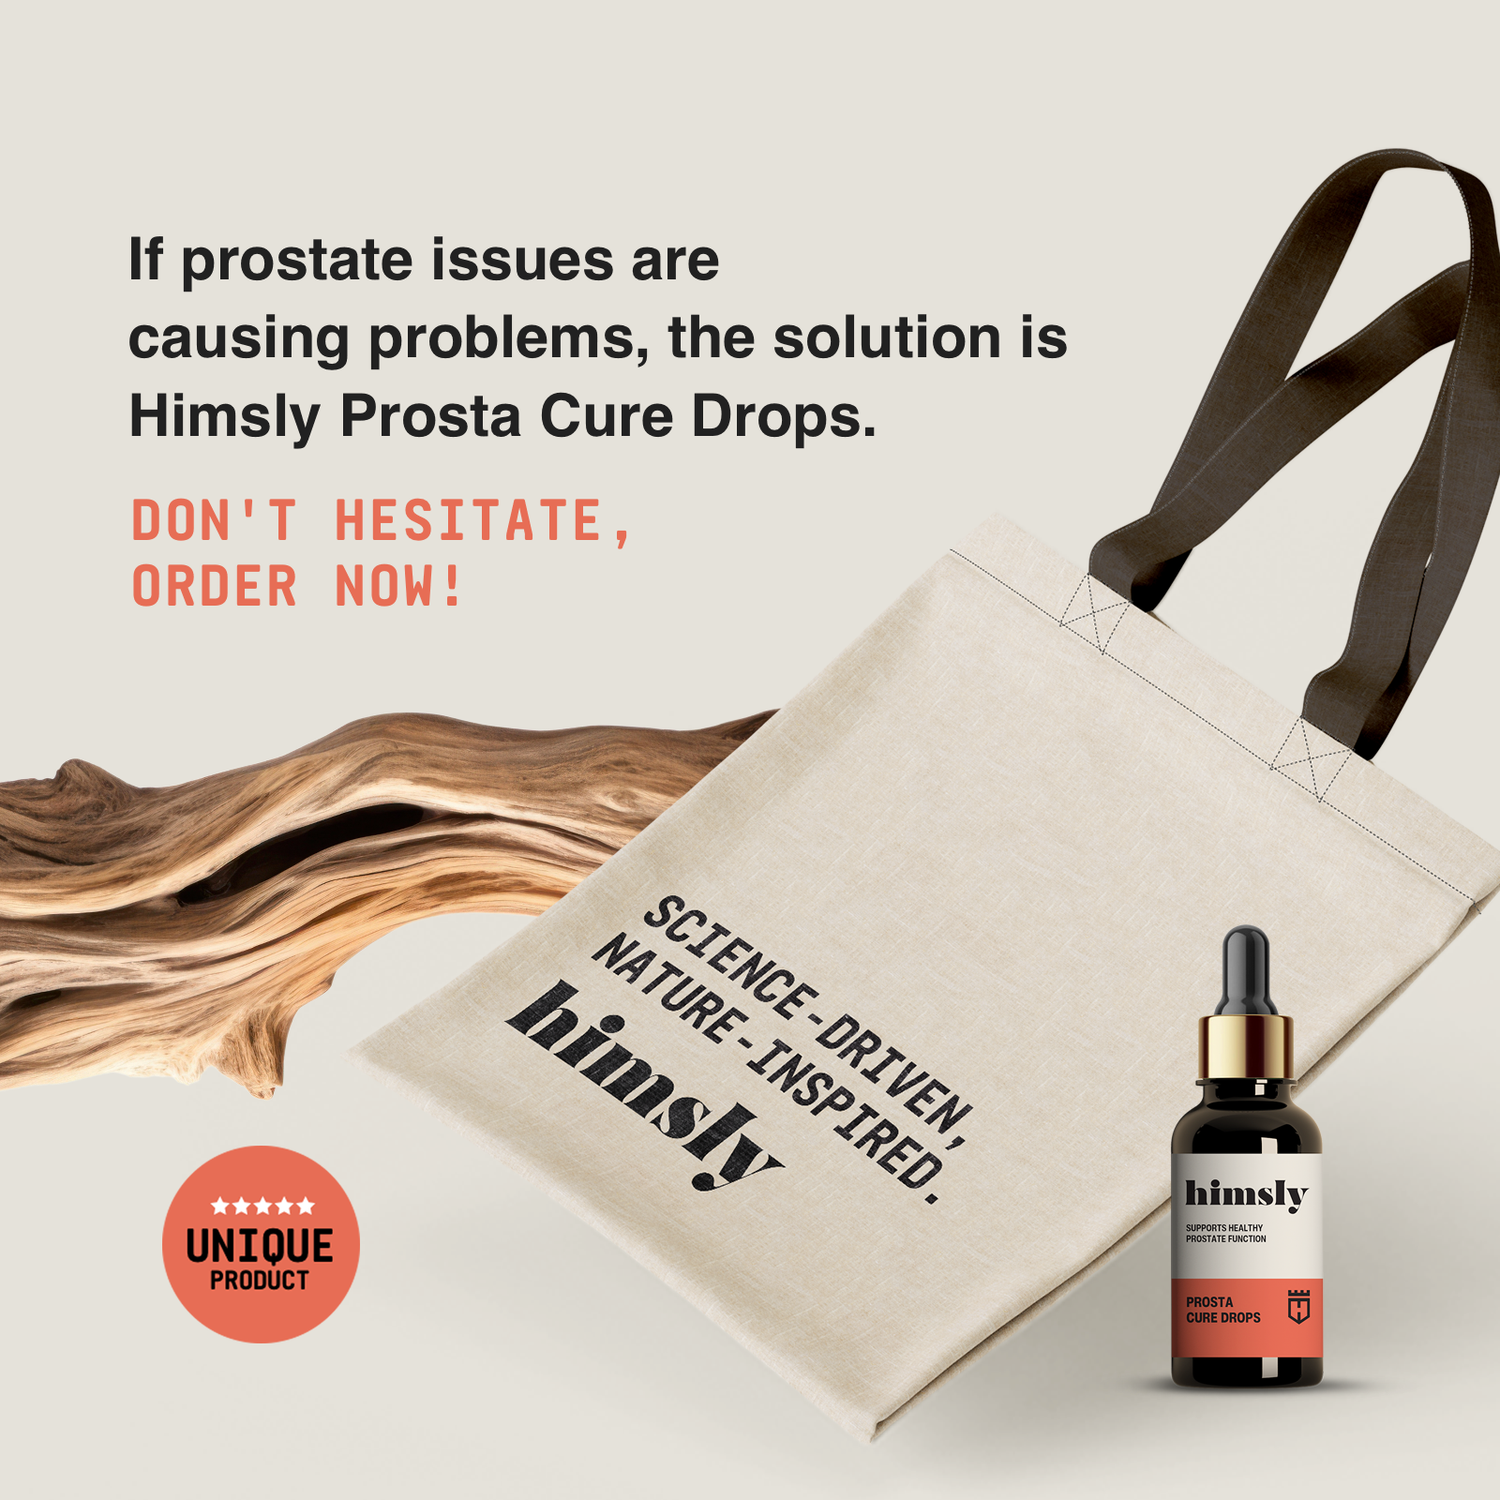 If prostate issues are causing problems, the solution is Himsly Prosta Cure Drops. 